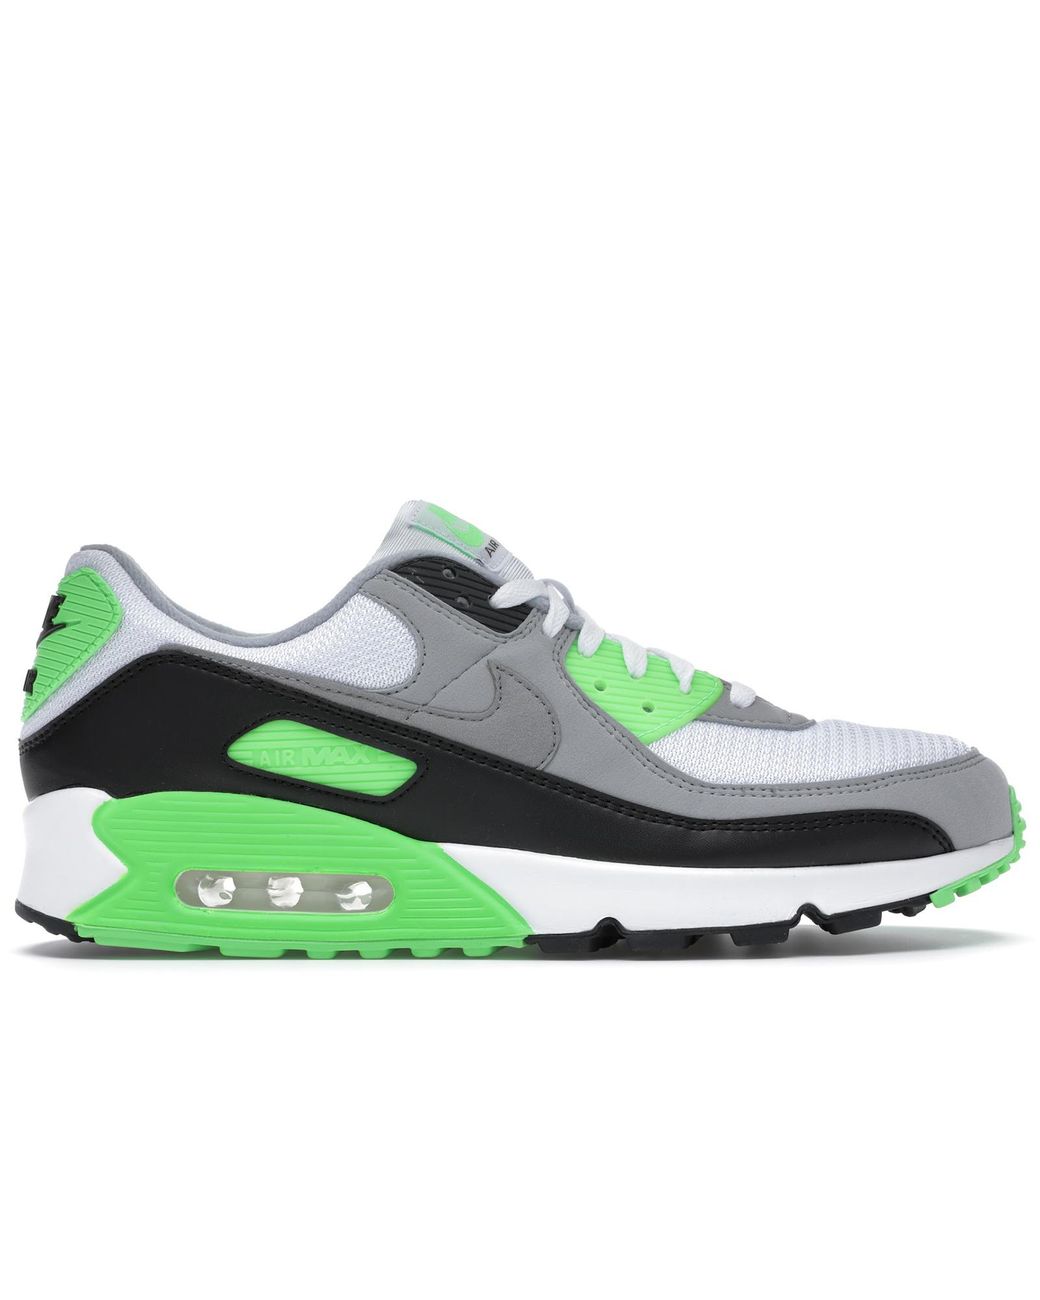 air max 90 lime green and black